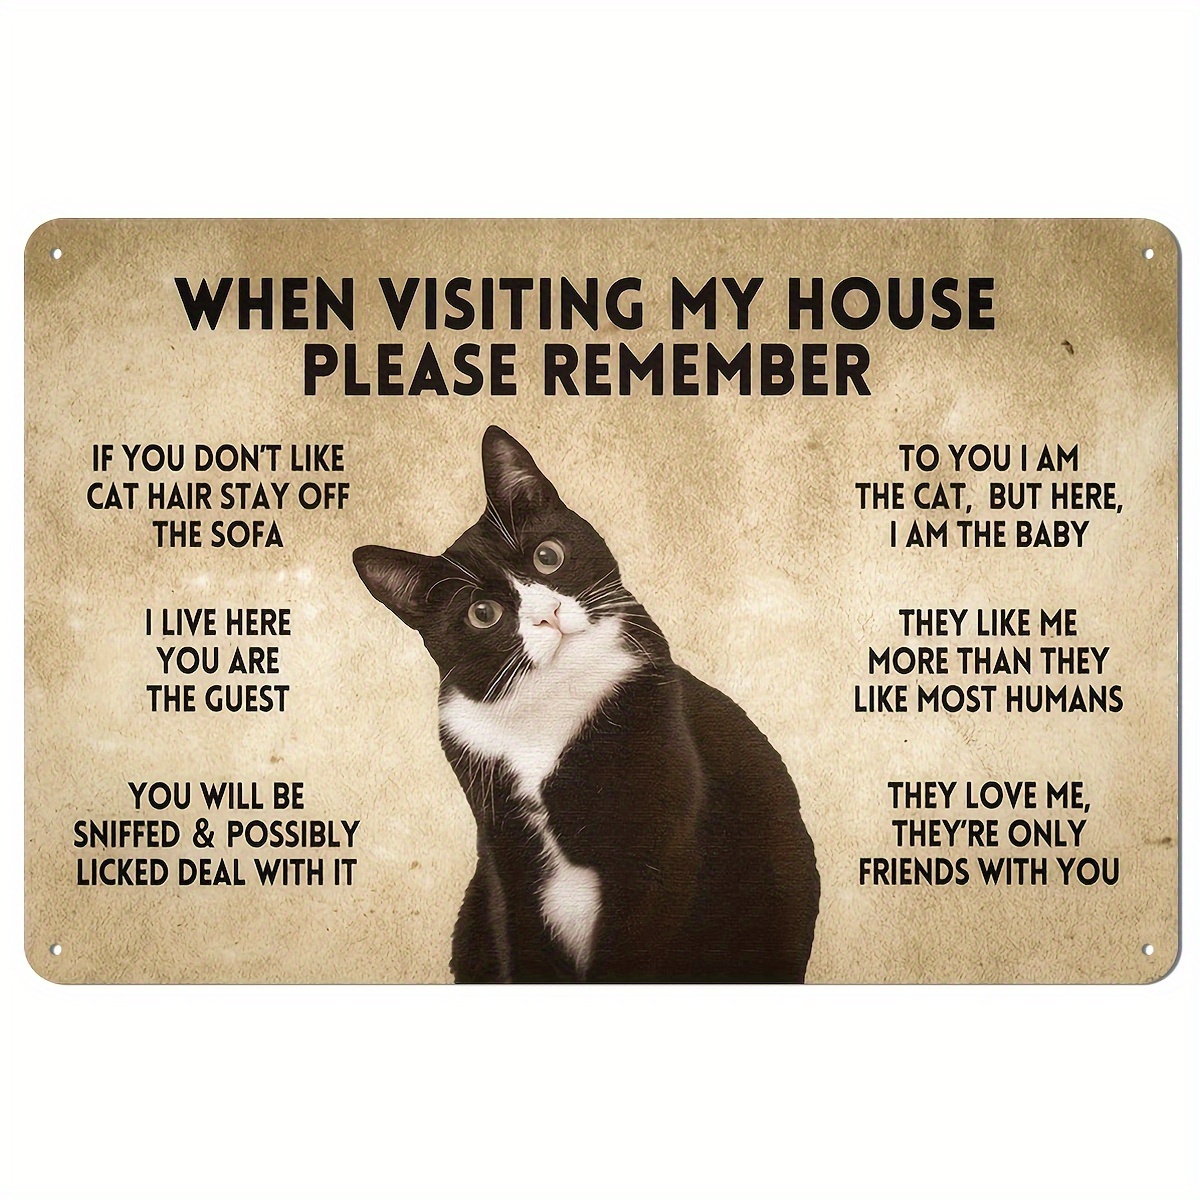 

1pc Funny Tuxedo Cat Rules Metal Sign 8x12inch, When Visiting My House Please Remember, Black Cat Apartment Decor For Cat Lover, Retro Room Decor Caution Sign